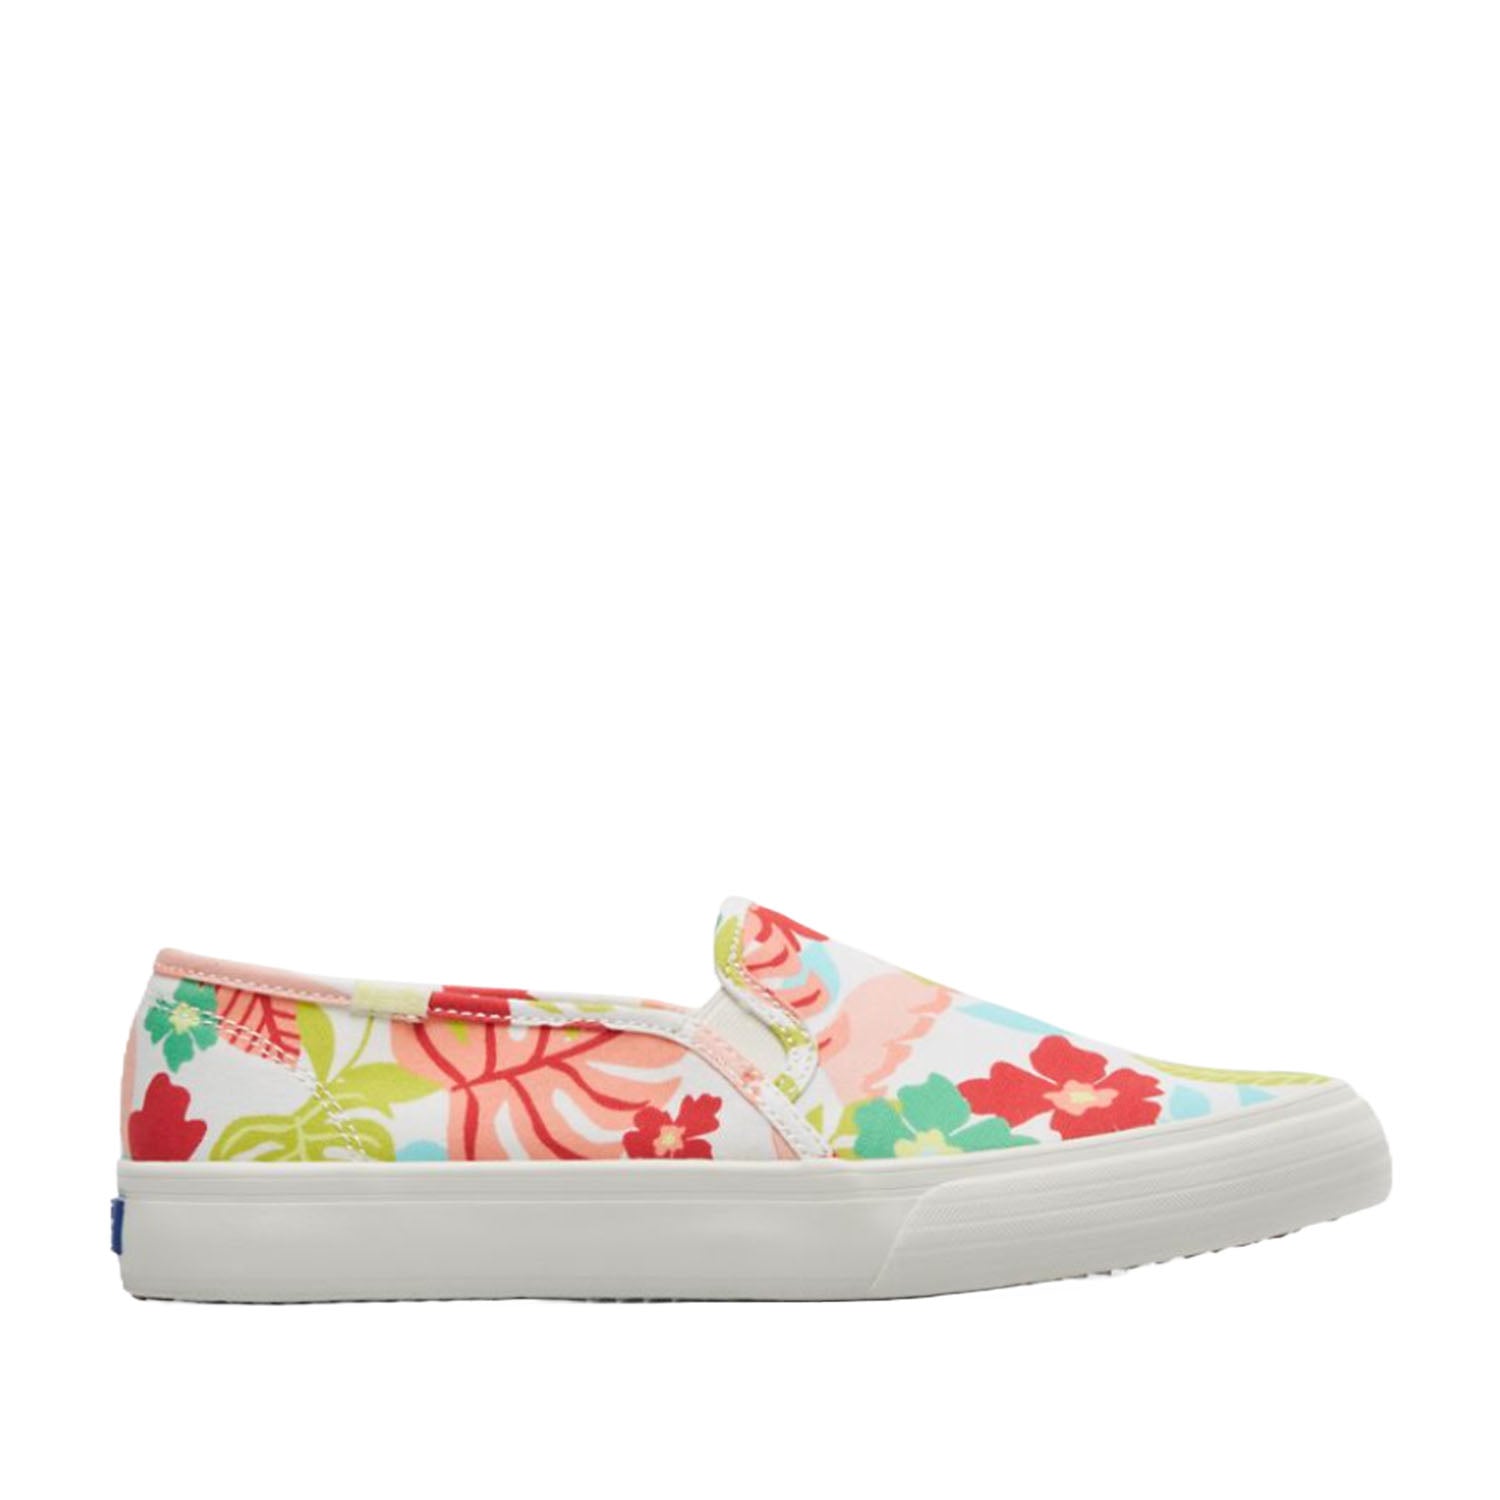 Keds Women's Double Decker Tropical Print in White/Coral